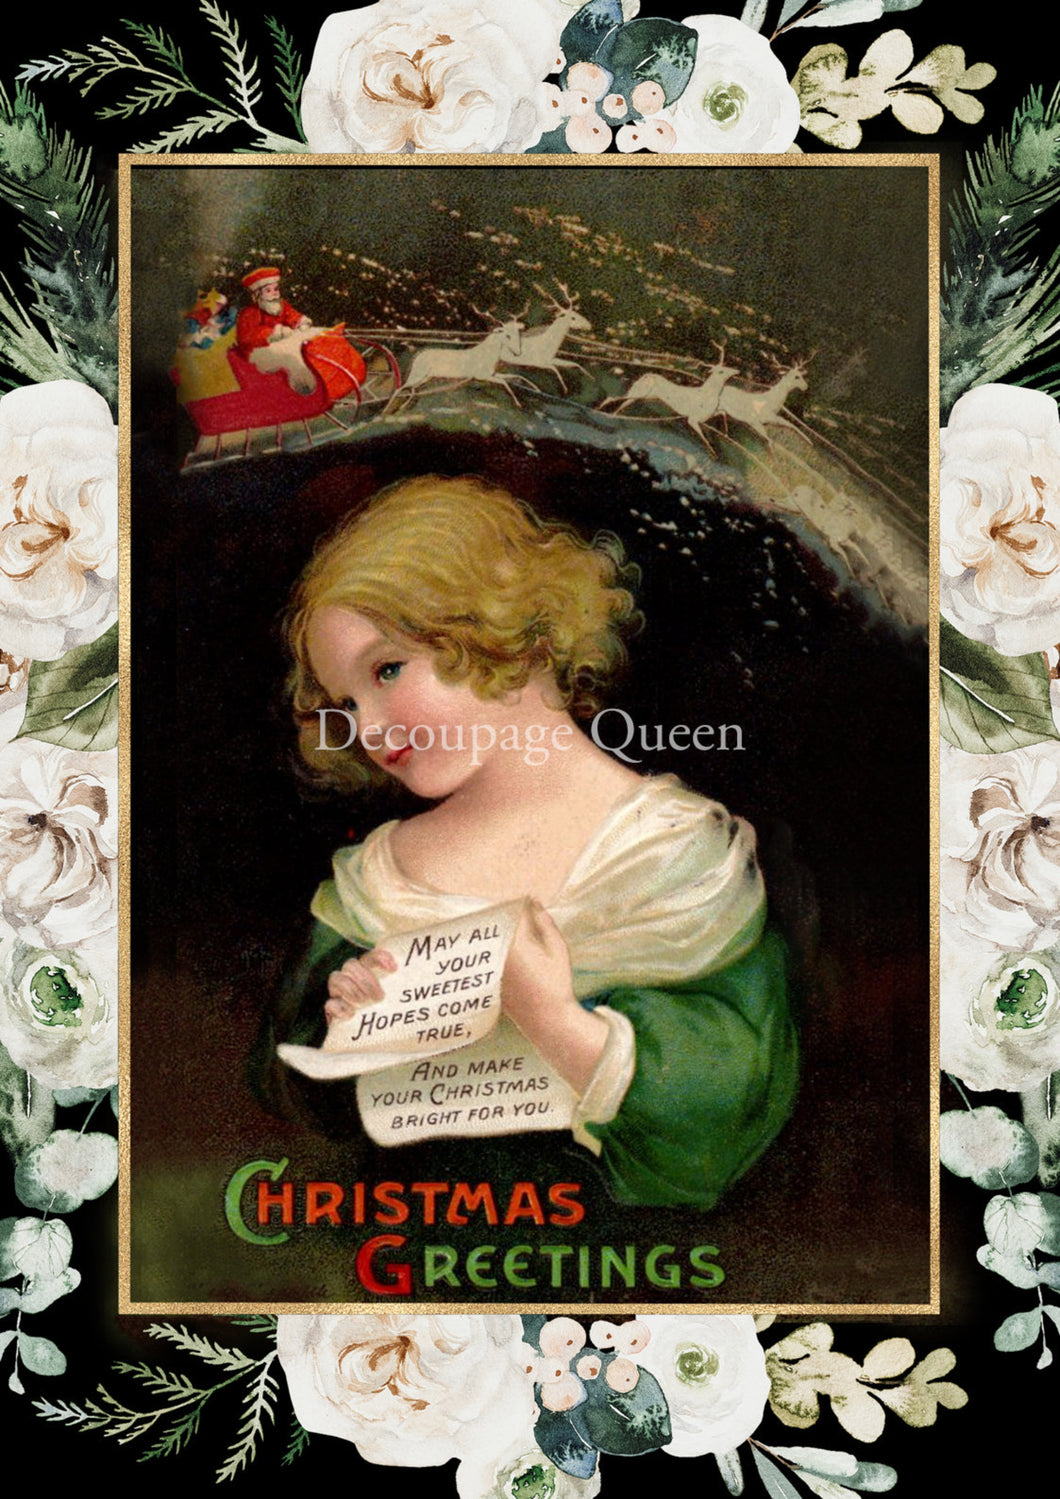 Joyful Christmas Greetings Rice Paper by Decoupage Queen